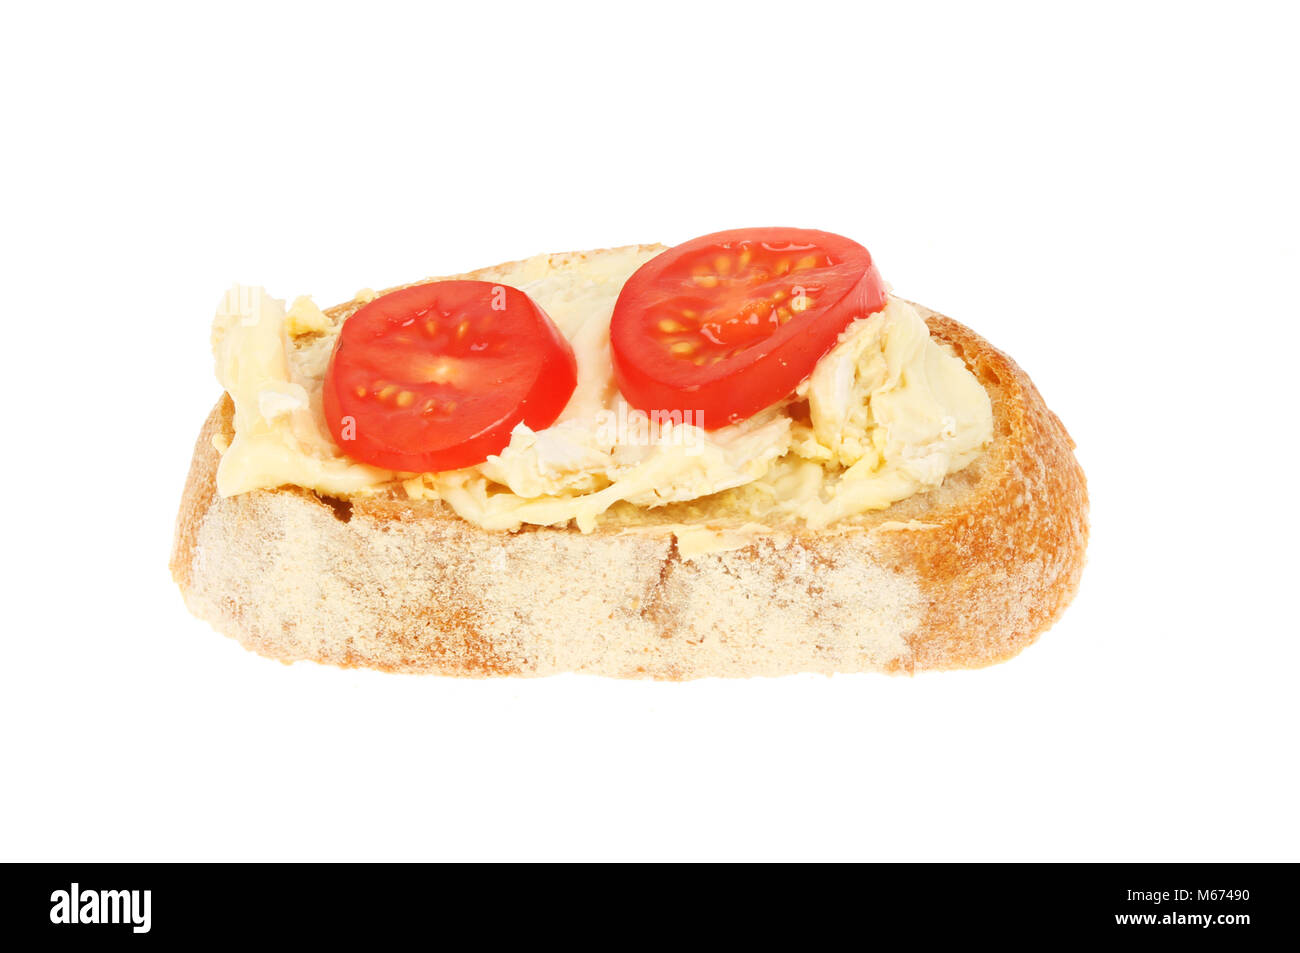 Brie cheese and tomato on rustic bread isolated against white Stock Photo